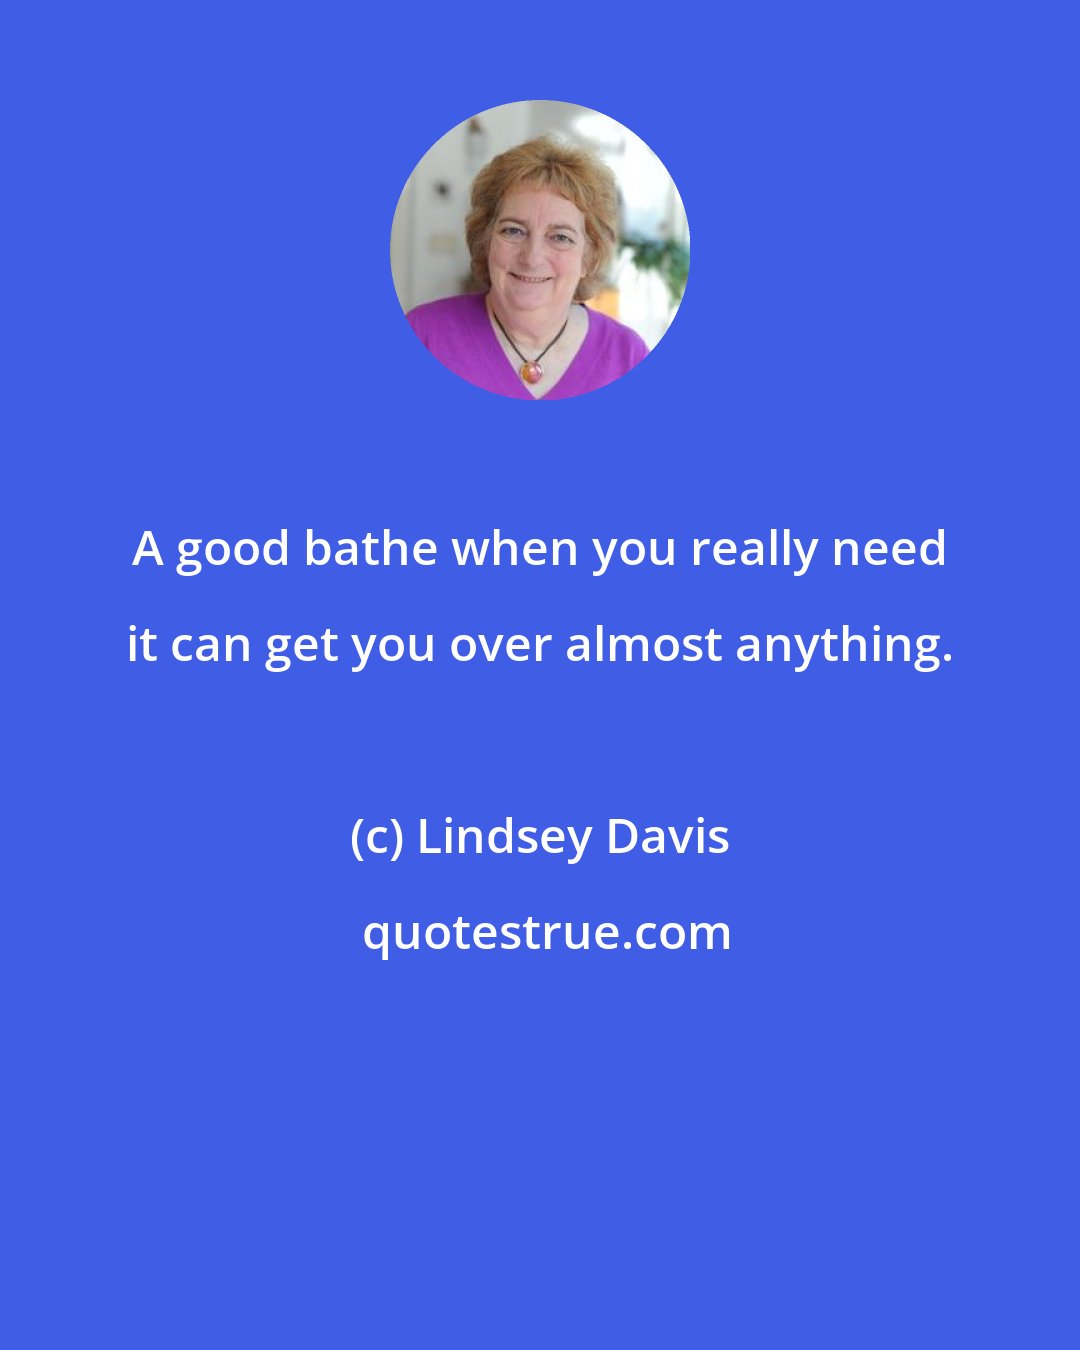 Lindsey Davis: A good bathe when you really need it can get you over almost anything.